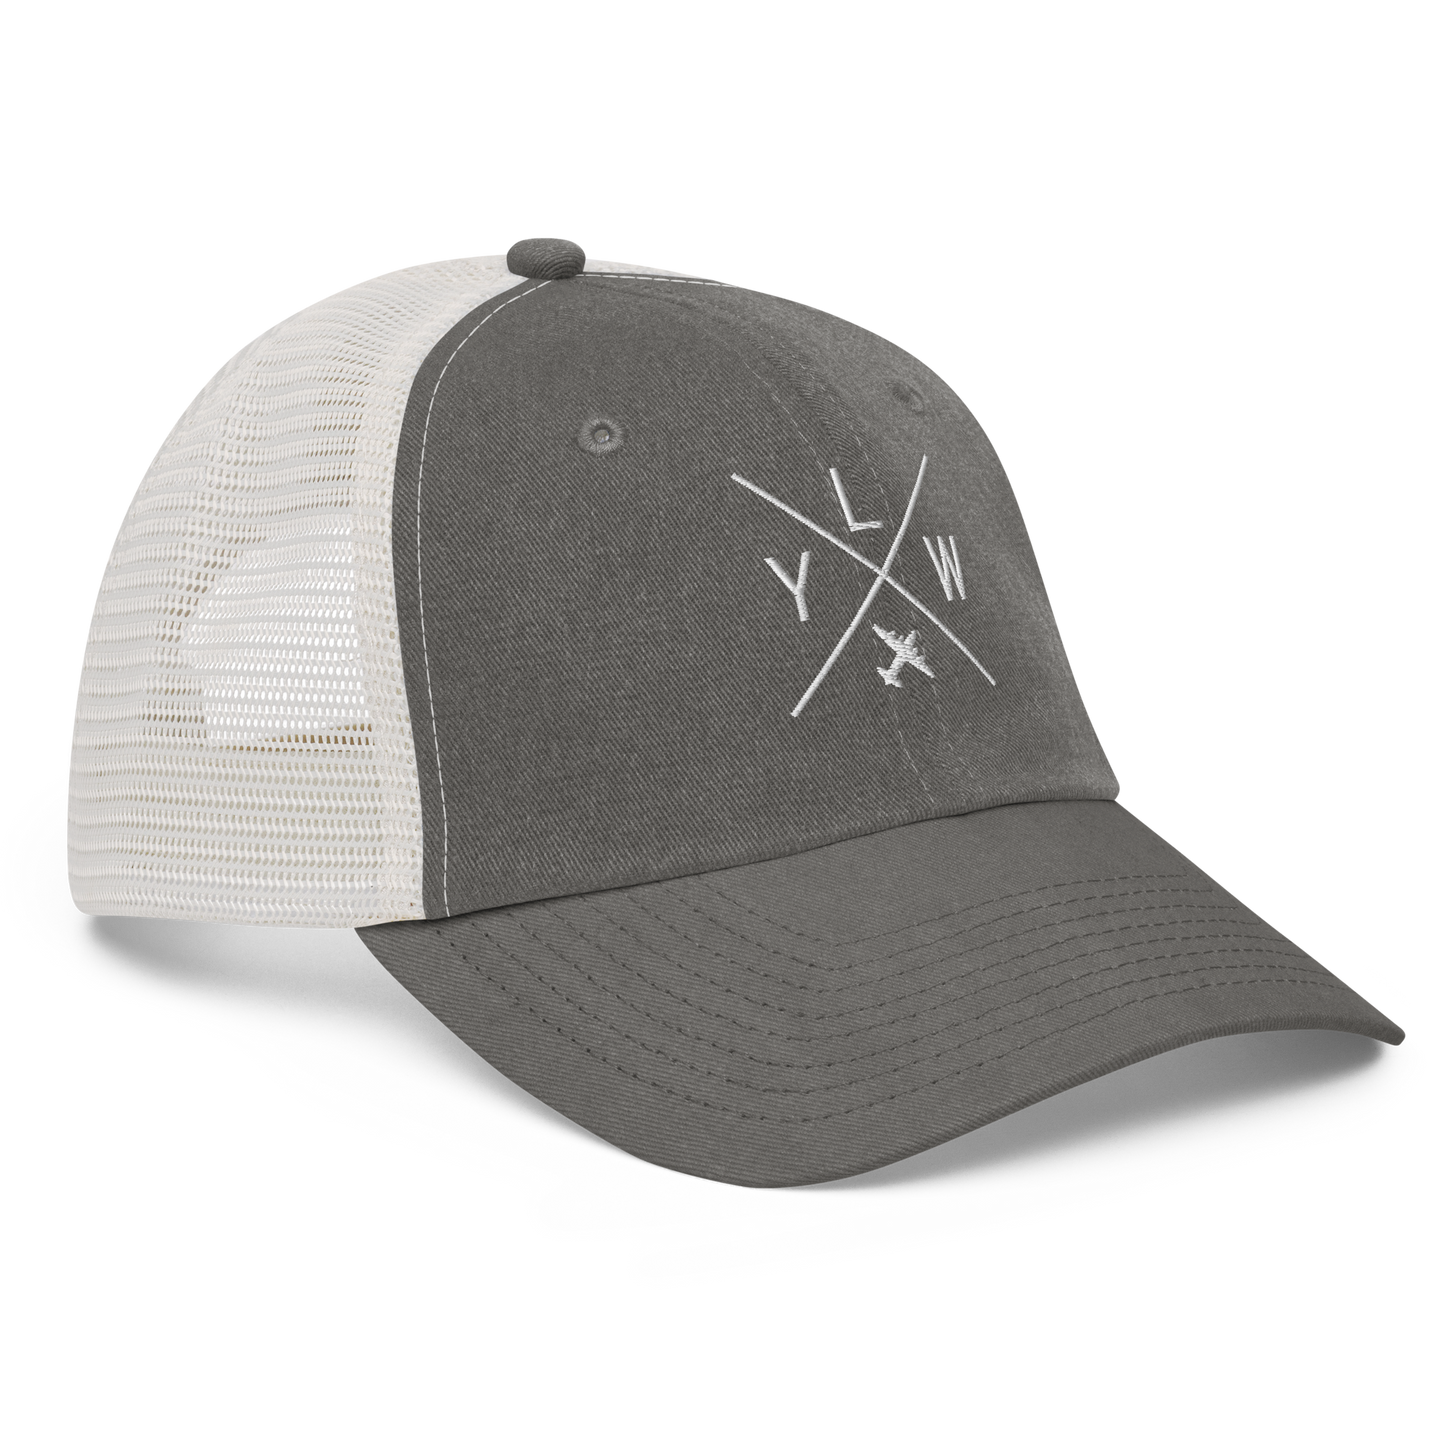 YHM Designs - YLW Kelowna Pigment-Dyed Trucker Cap - Crossed-X Design with Airport Code and Vintage Propliner - White Embroidery - Image 10